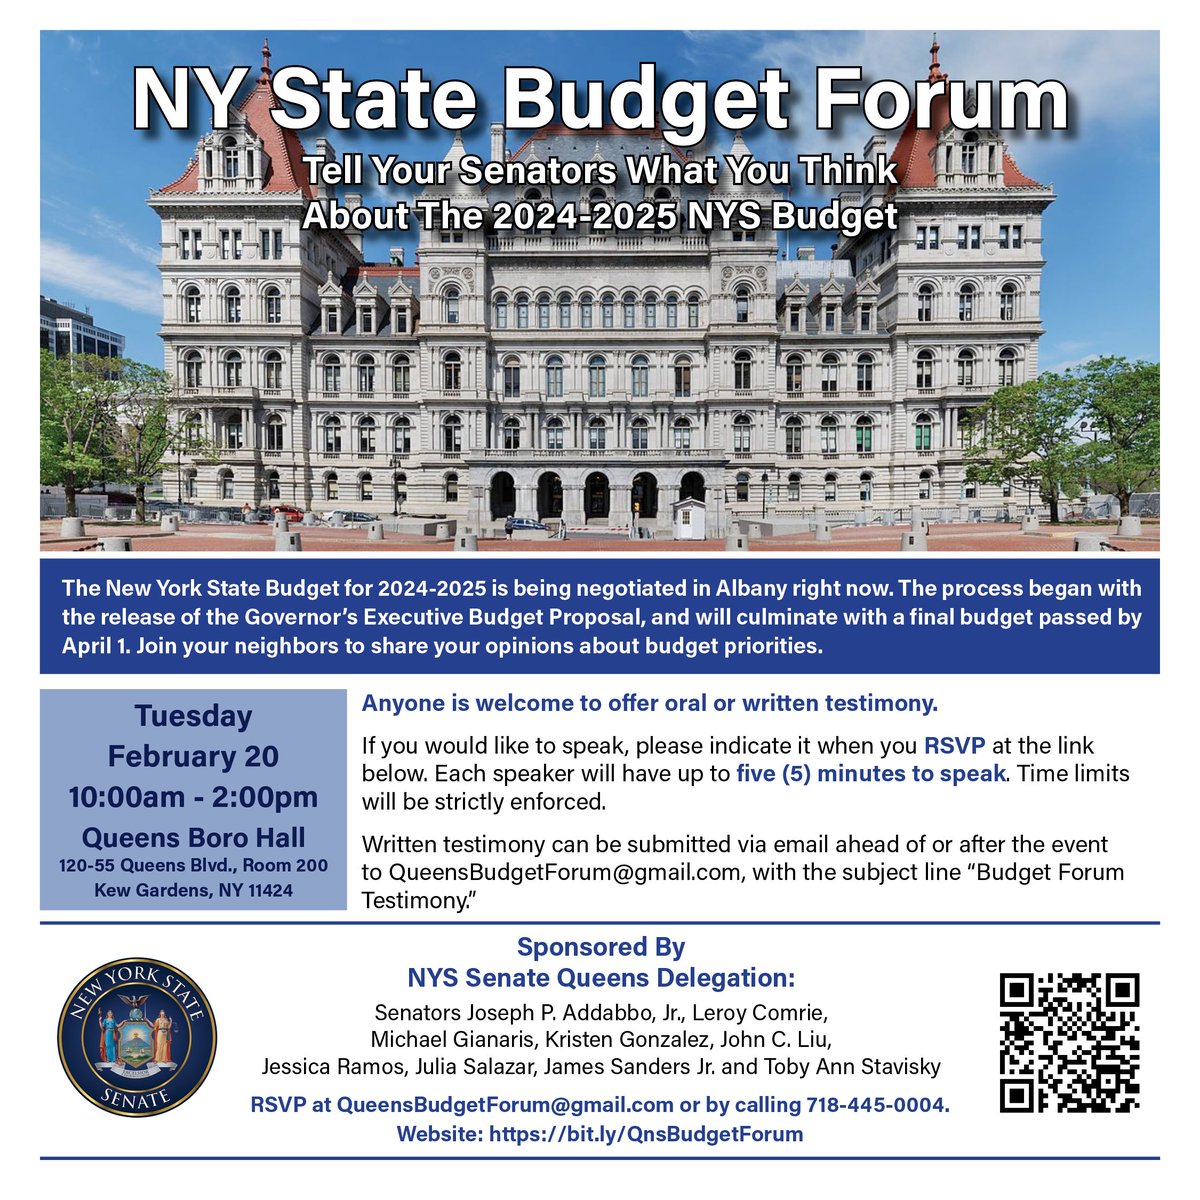 Are you a community group that would like to comment on this year's State budget? Tomorrow is the last day to sign-up. We have a few spots left.